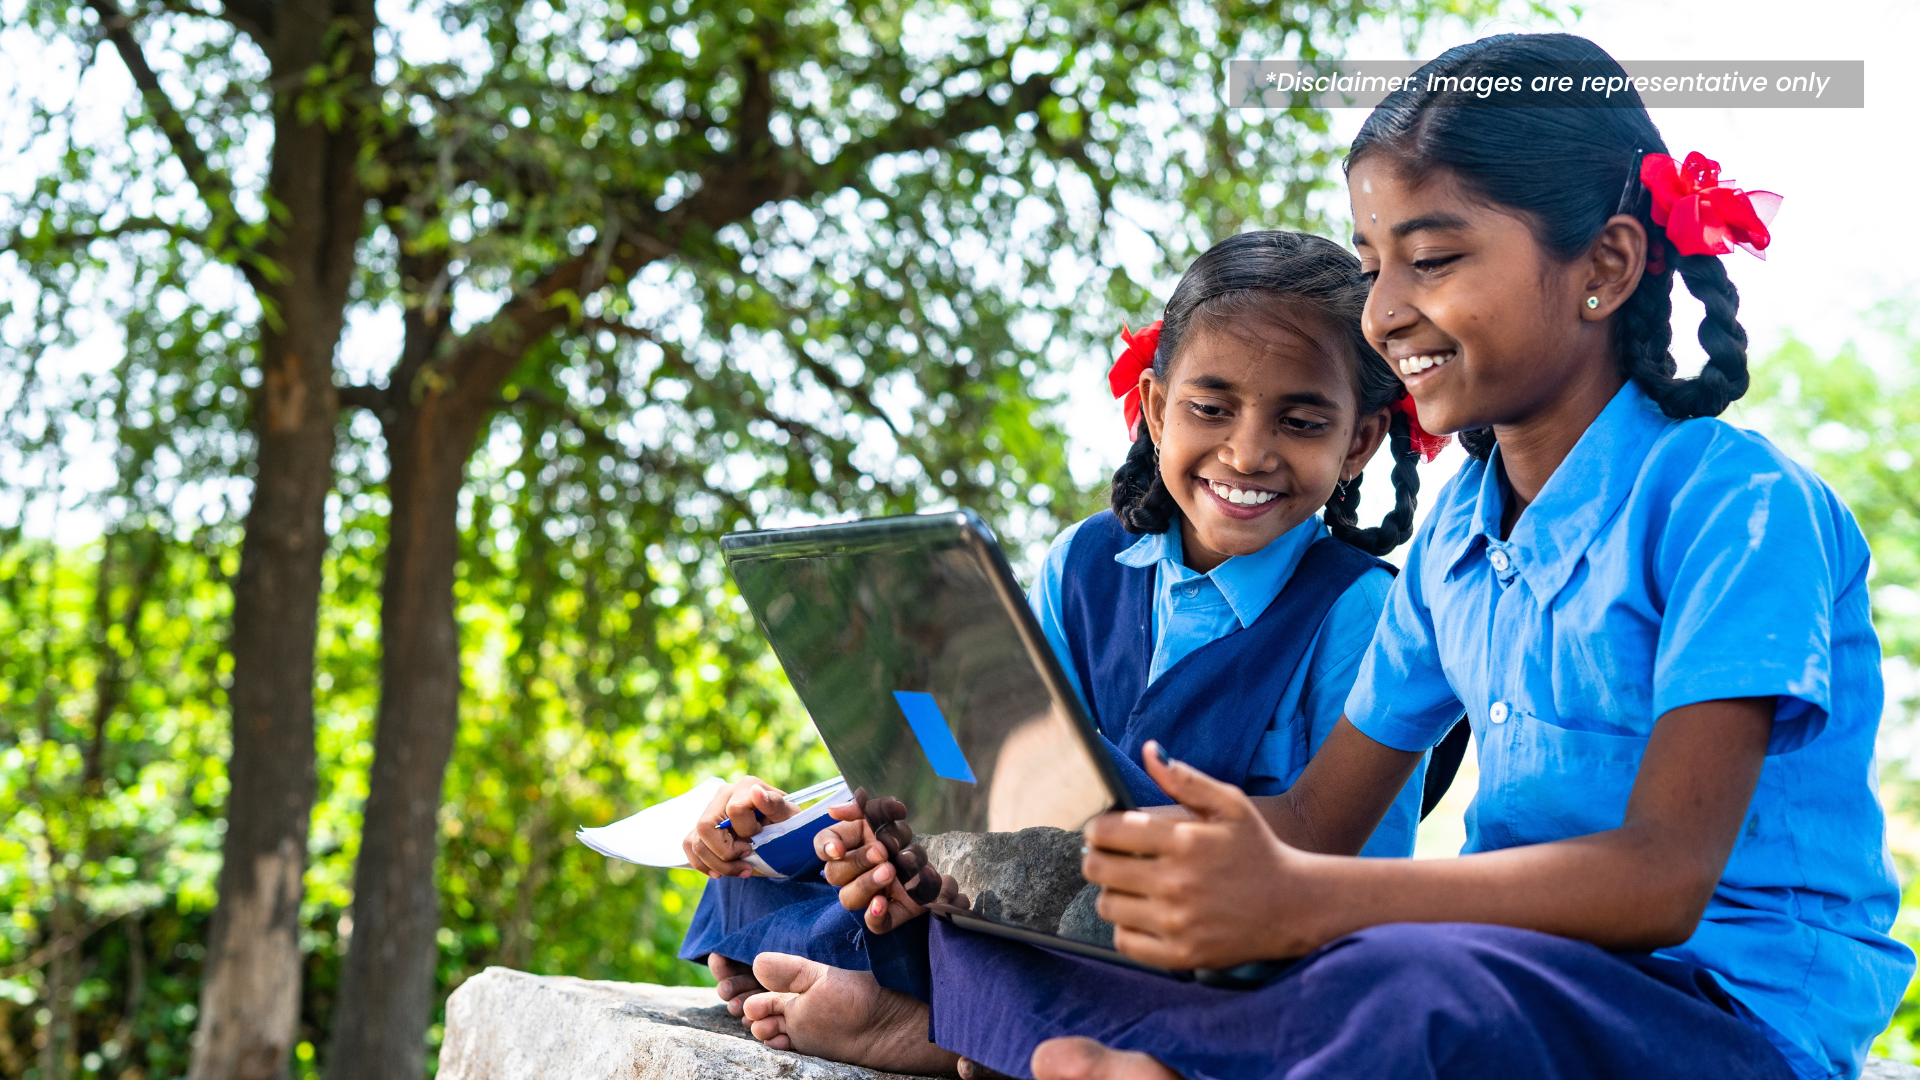 10 positive changes that happen when you educate girls